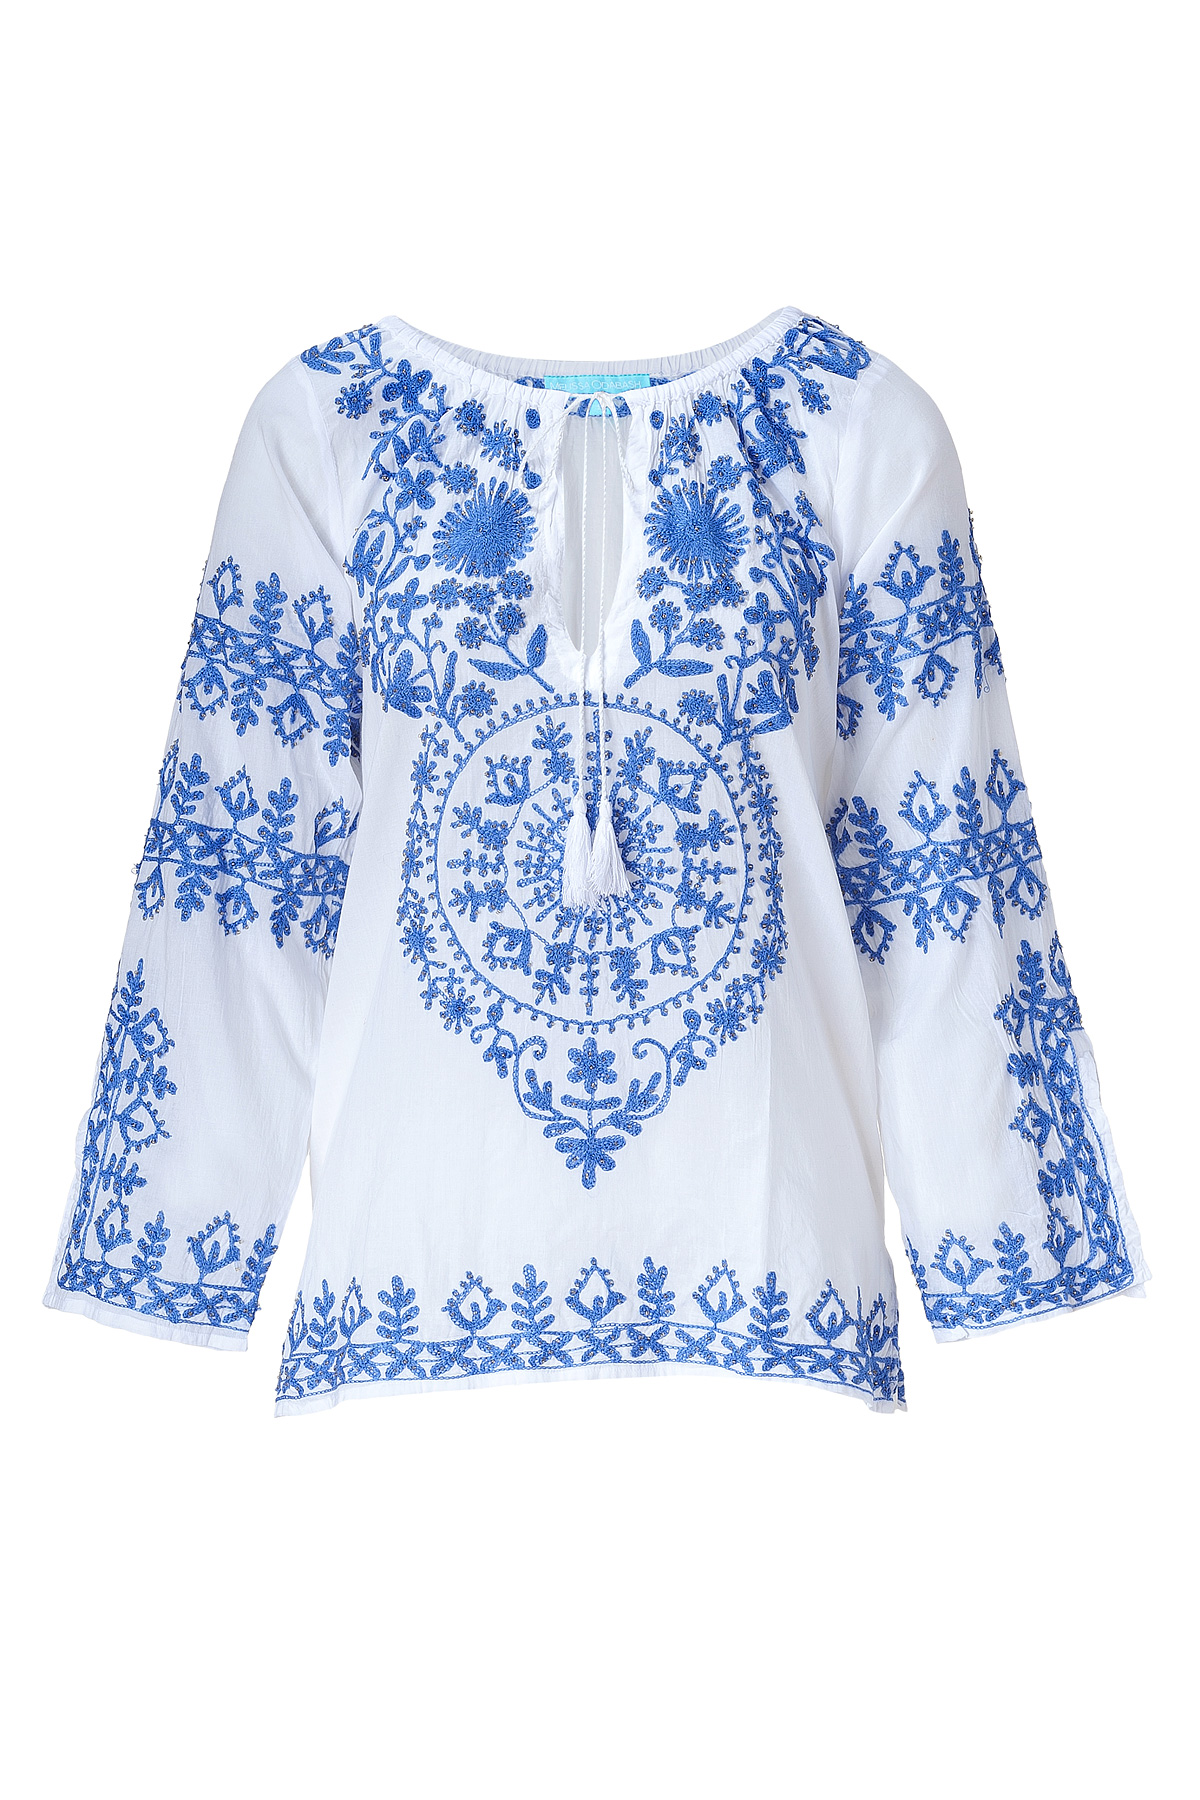 Melissa Odabash Embroidered Tunic Top in Blue - Lyst